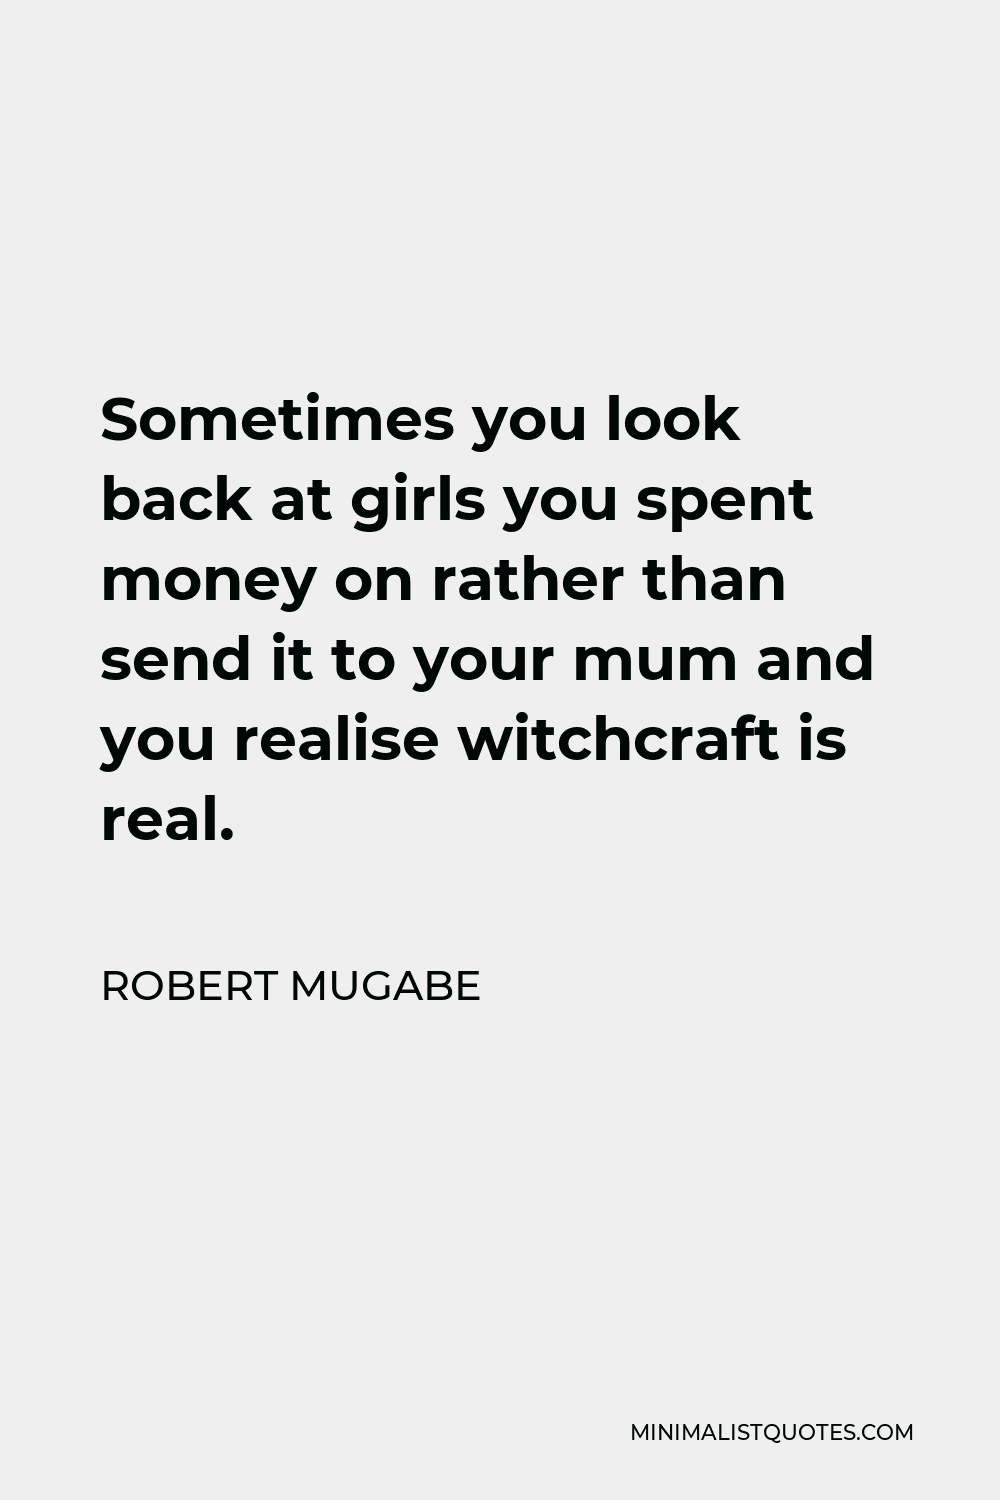 Robert Mugabe Quote - Sometimes you look back at girls you spent money on rather than send it to your mum and you realise witchcraft is real.